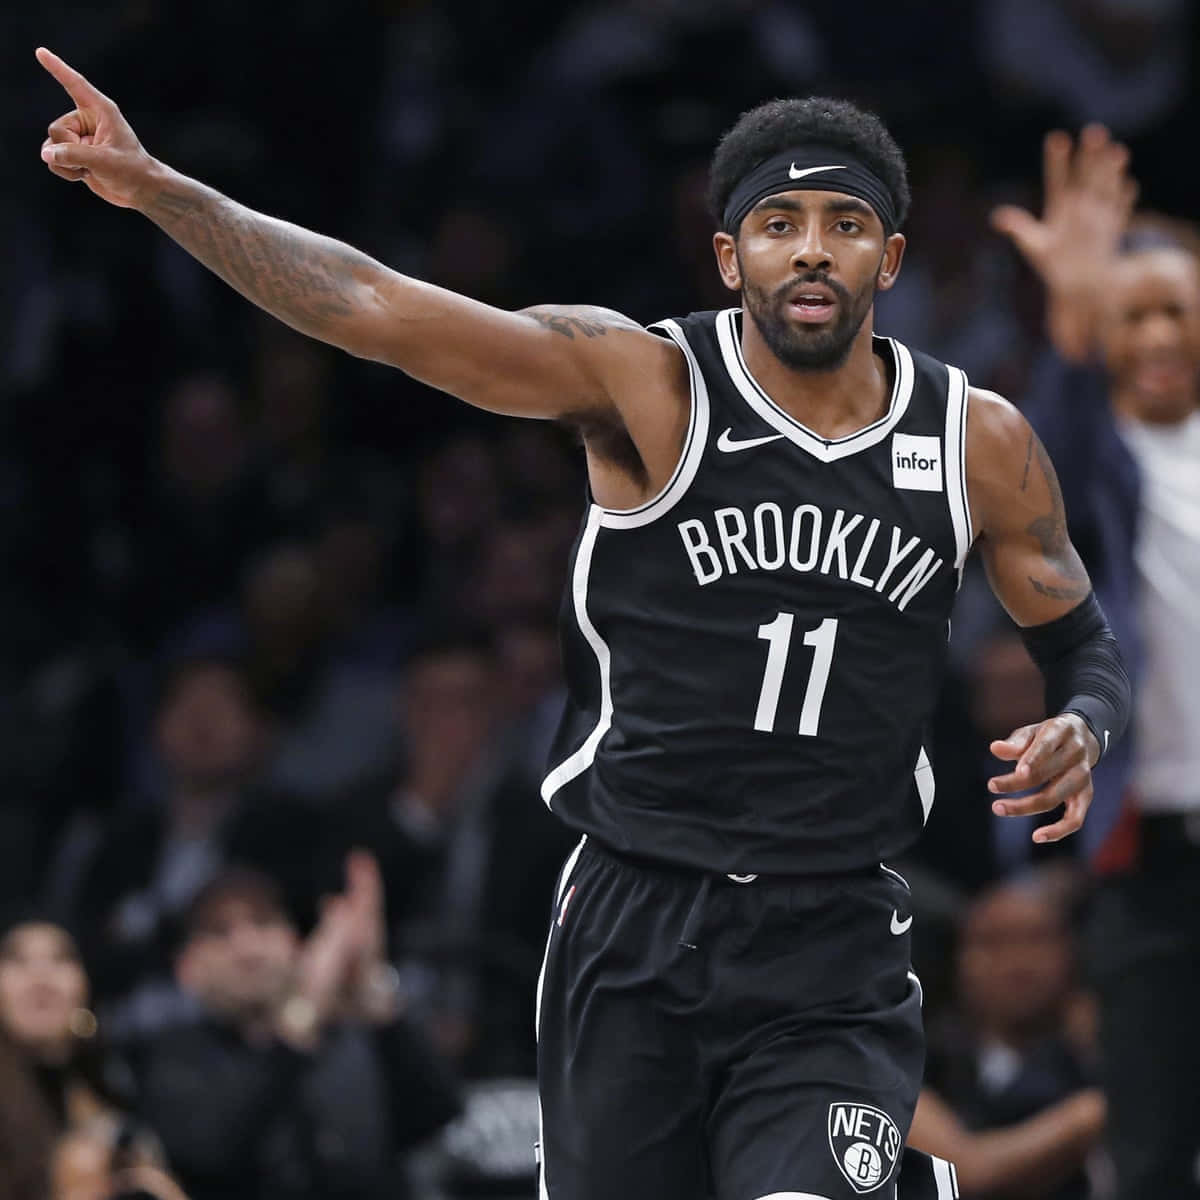 NBA Superstar Kyrie Irving Aims to Lead Nets to the Championship Wallpaper